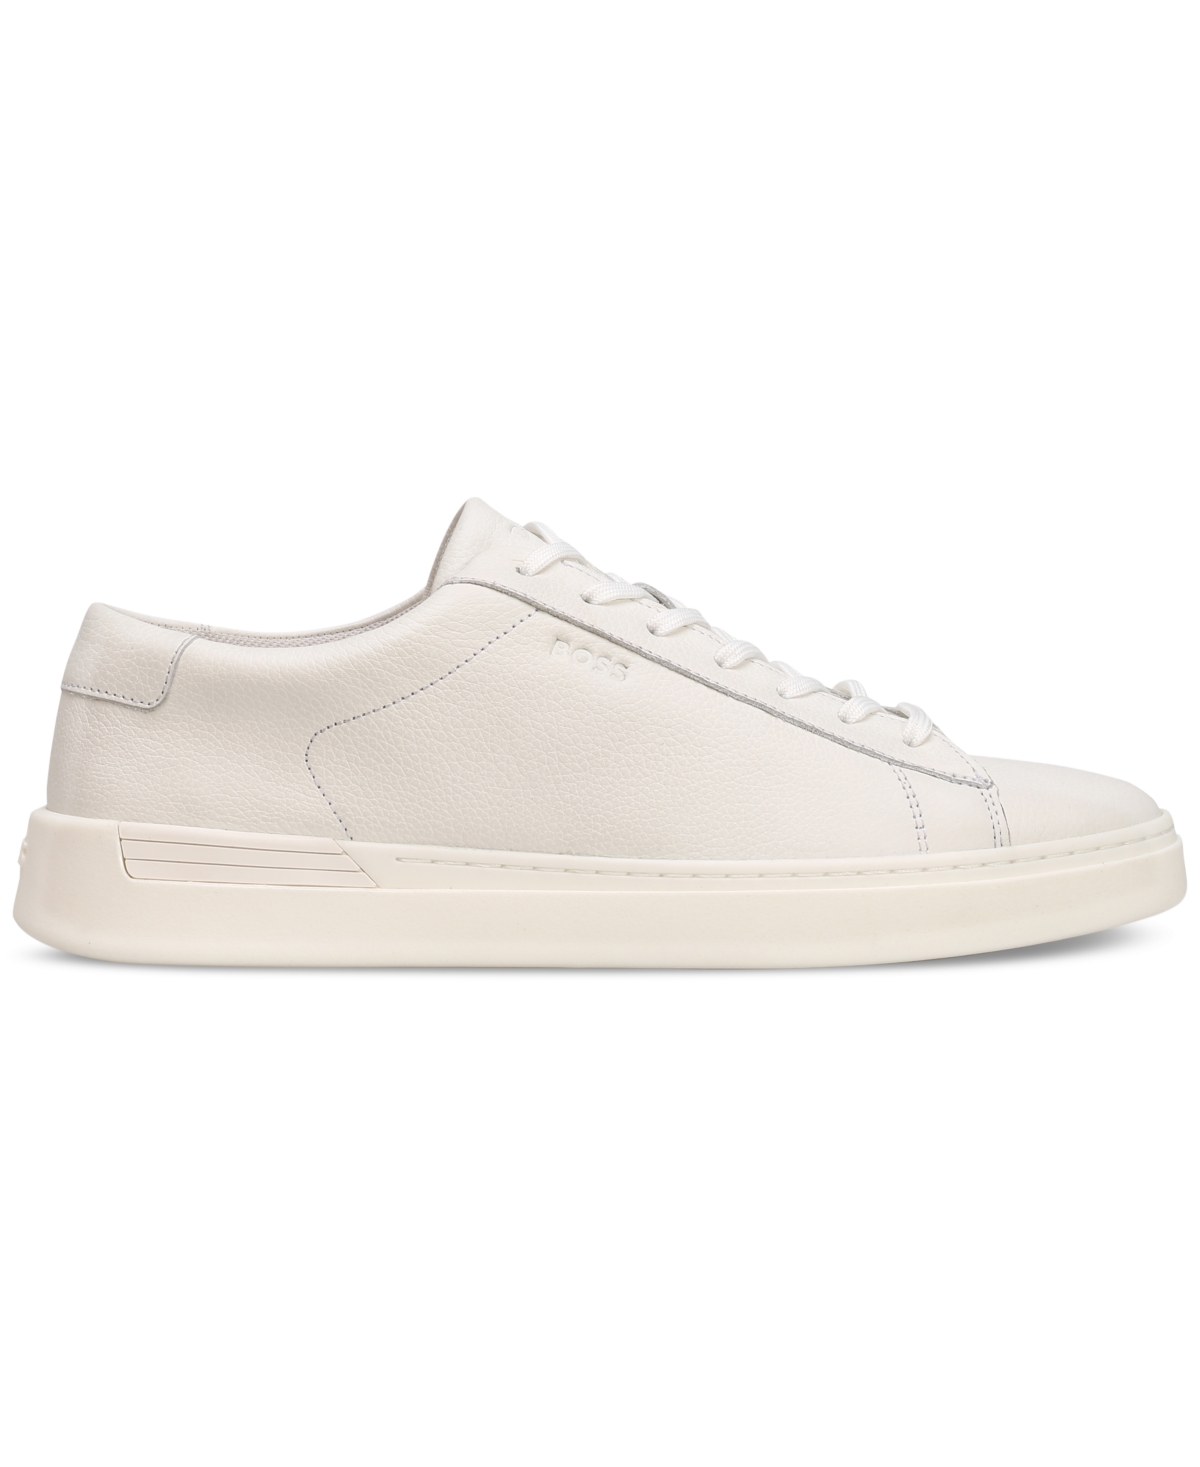 Hugo Boss Men's Clint Lace Up Sneakers In White